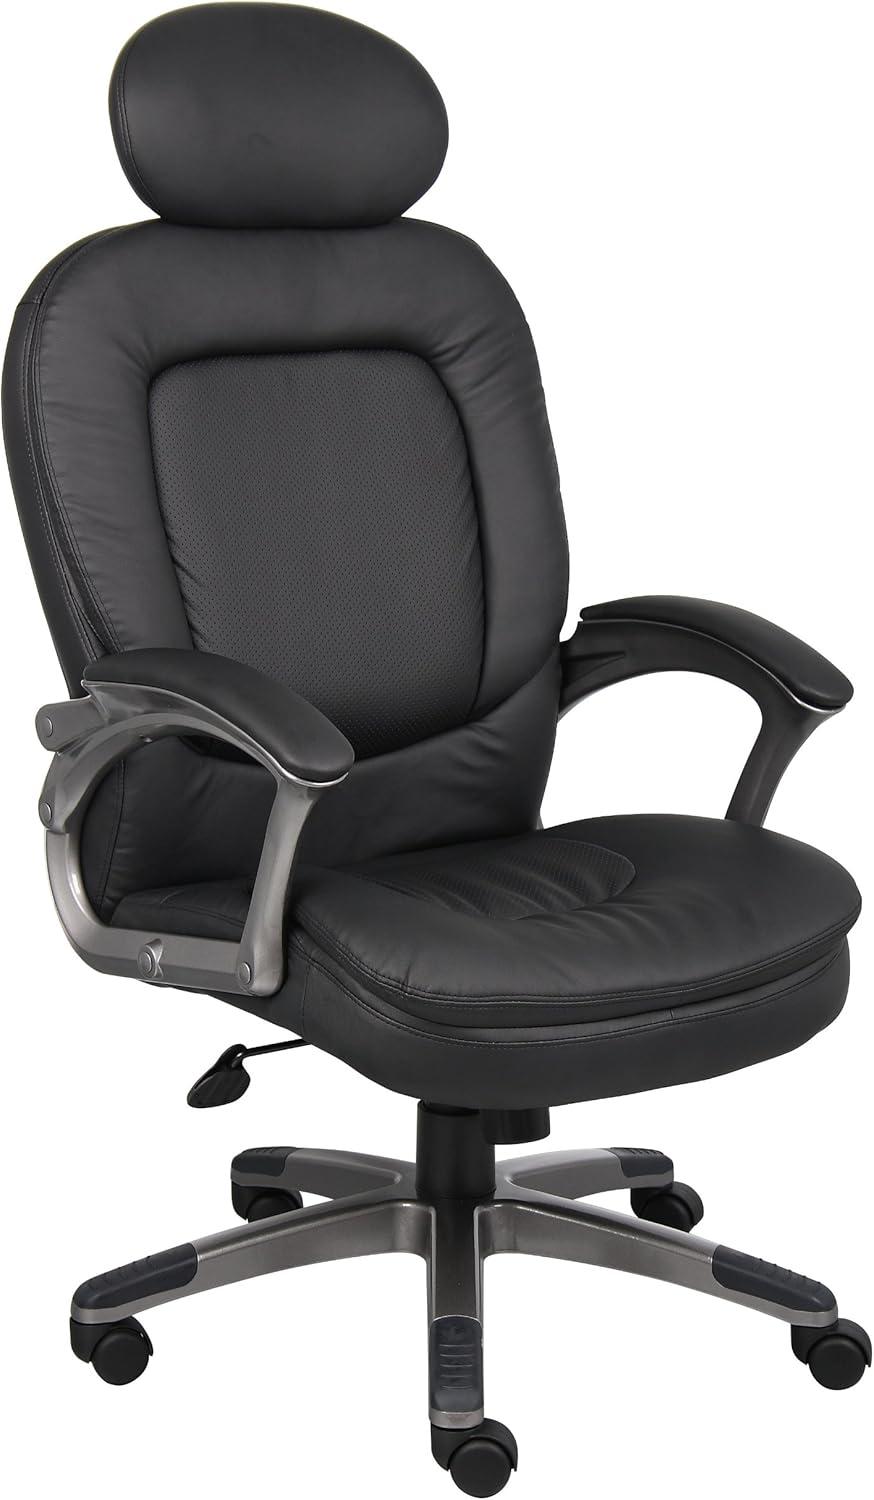 Pewter Finish High-Back Executive Leather Swivel Chair with Pillow Top